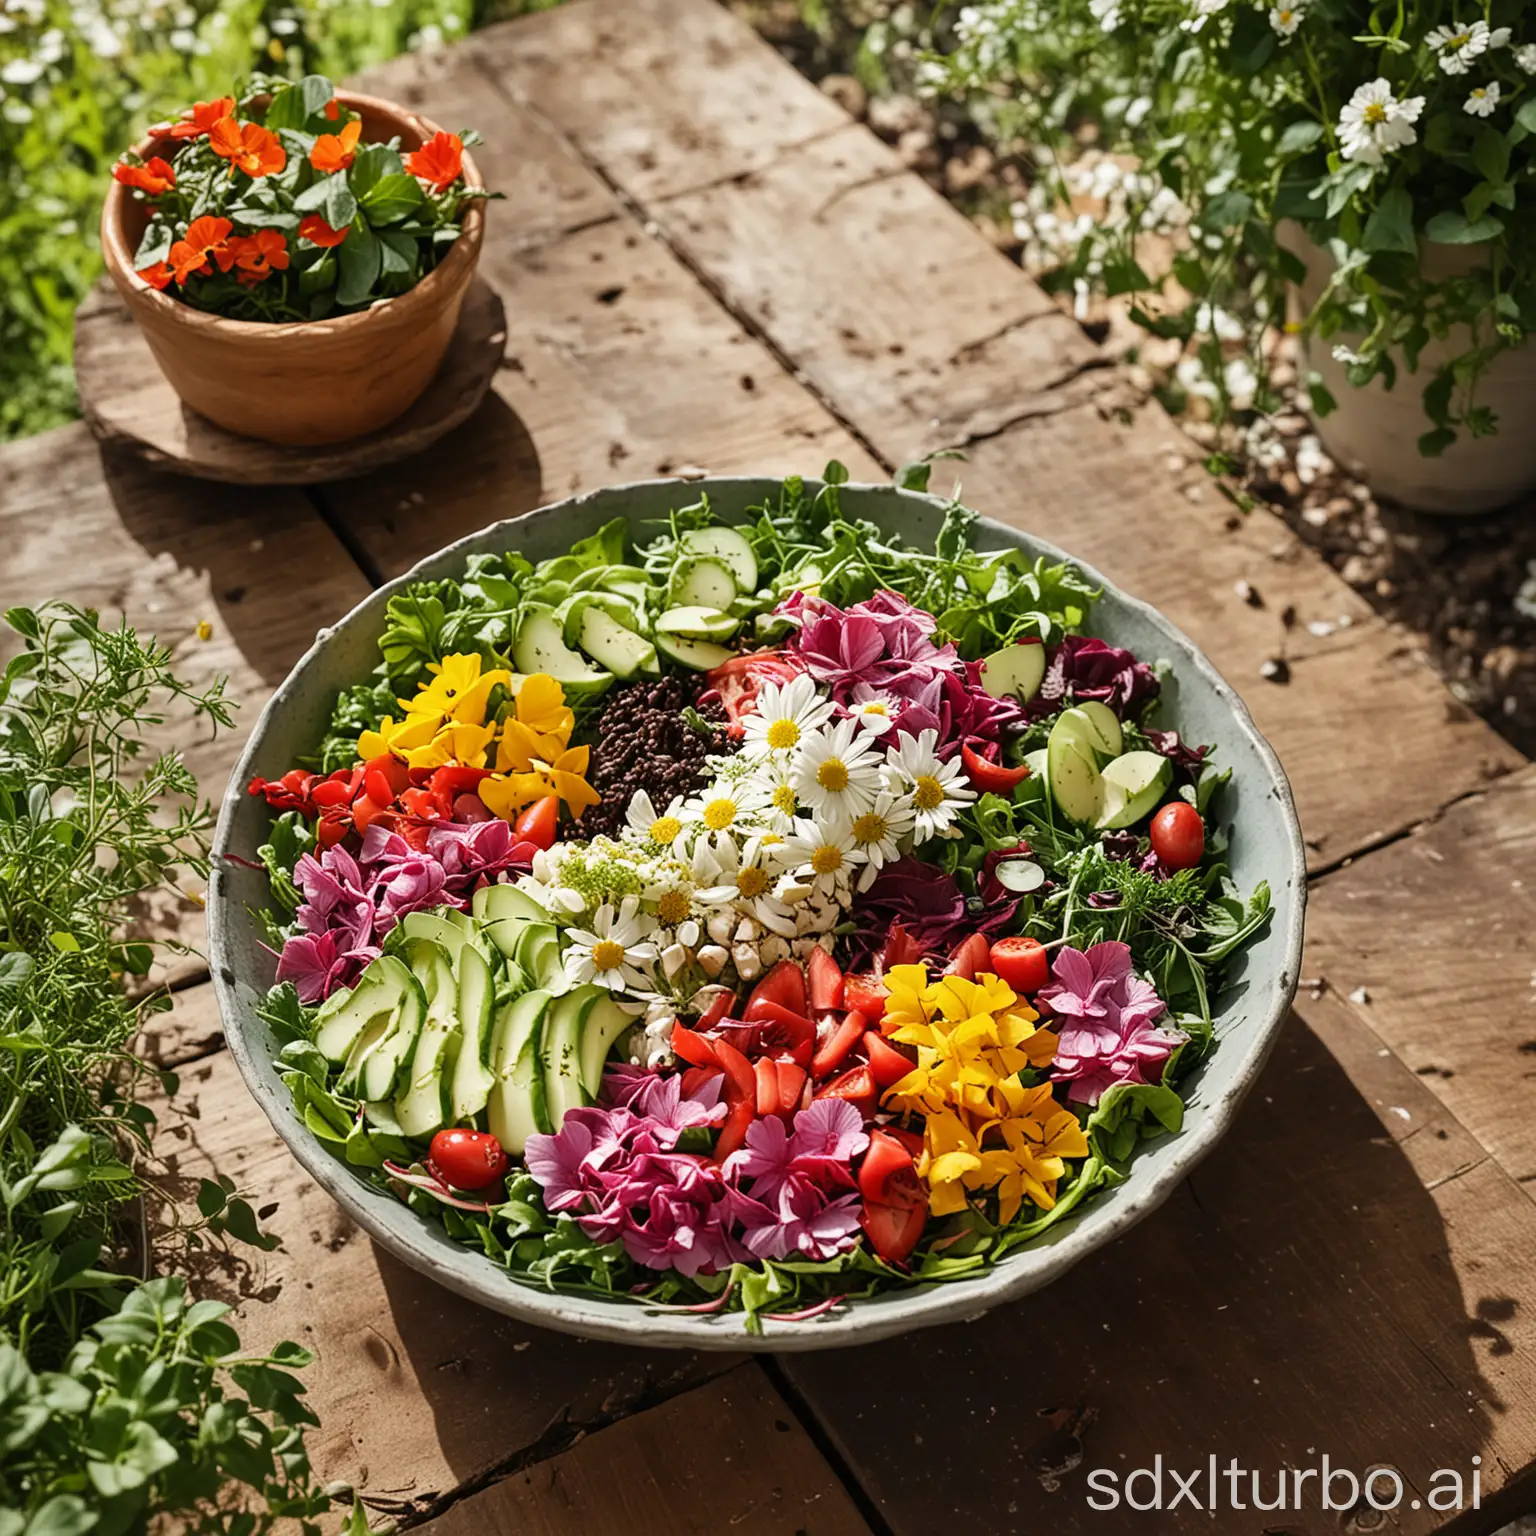 Vibrant-Salad-Presentation-on-Rustic-Outdoor-Dining-Table